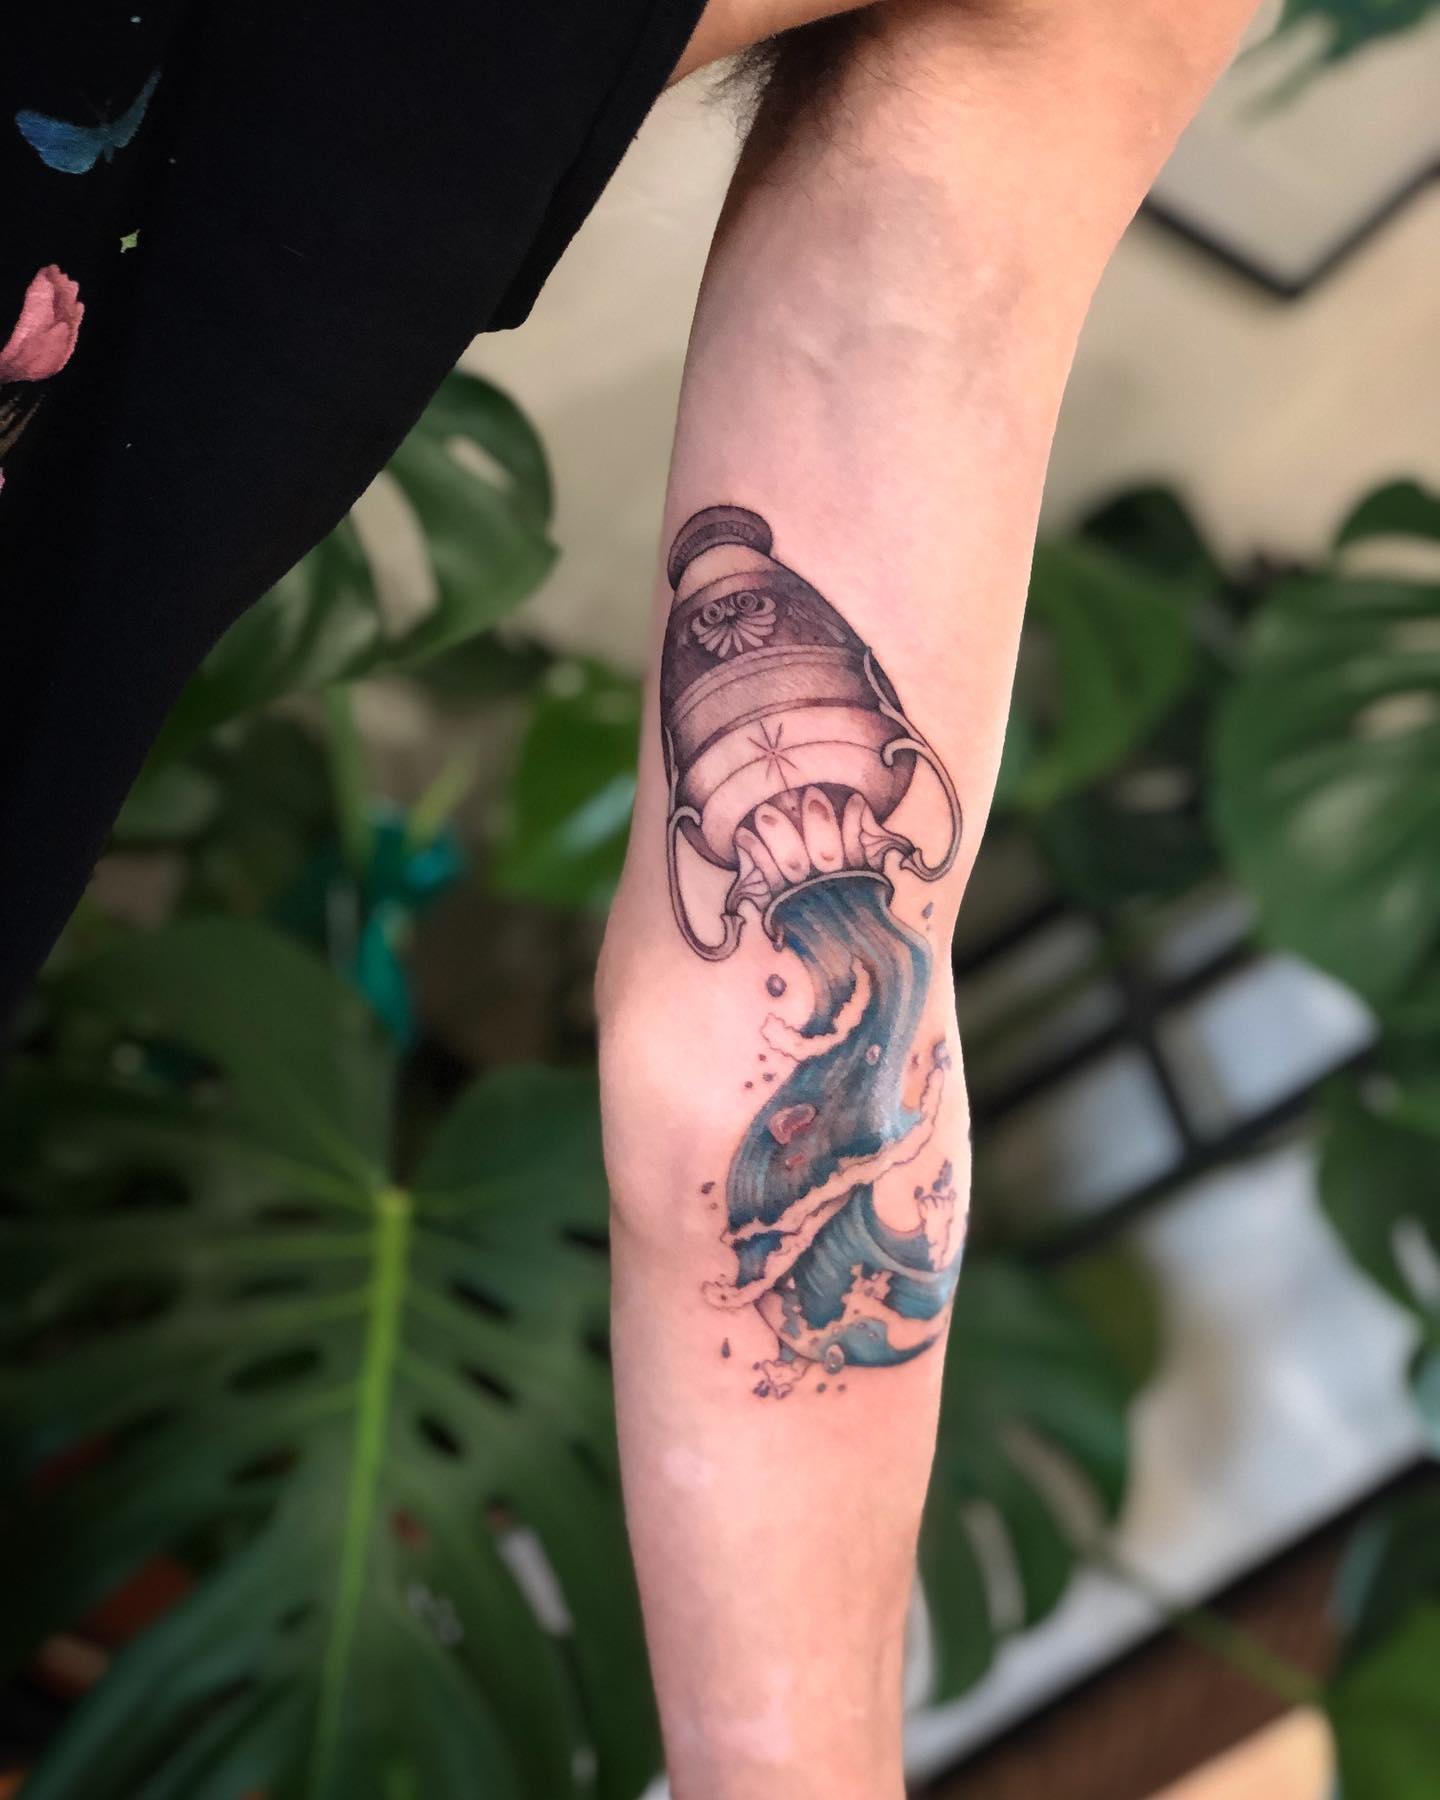 In order to give your arm a quite different and amazing look, you can wear your zodiac sign. Big size bucket is upside down and the water is poured down in this tattoo design. Show your free soul with it.